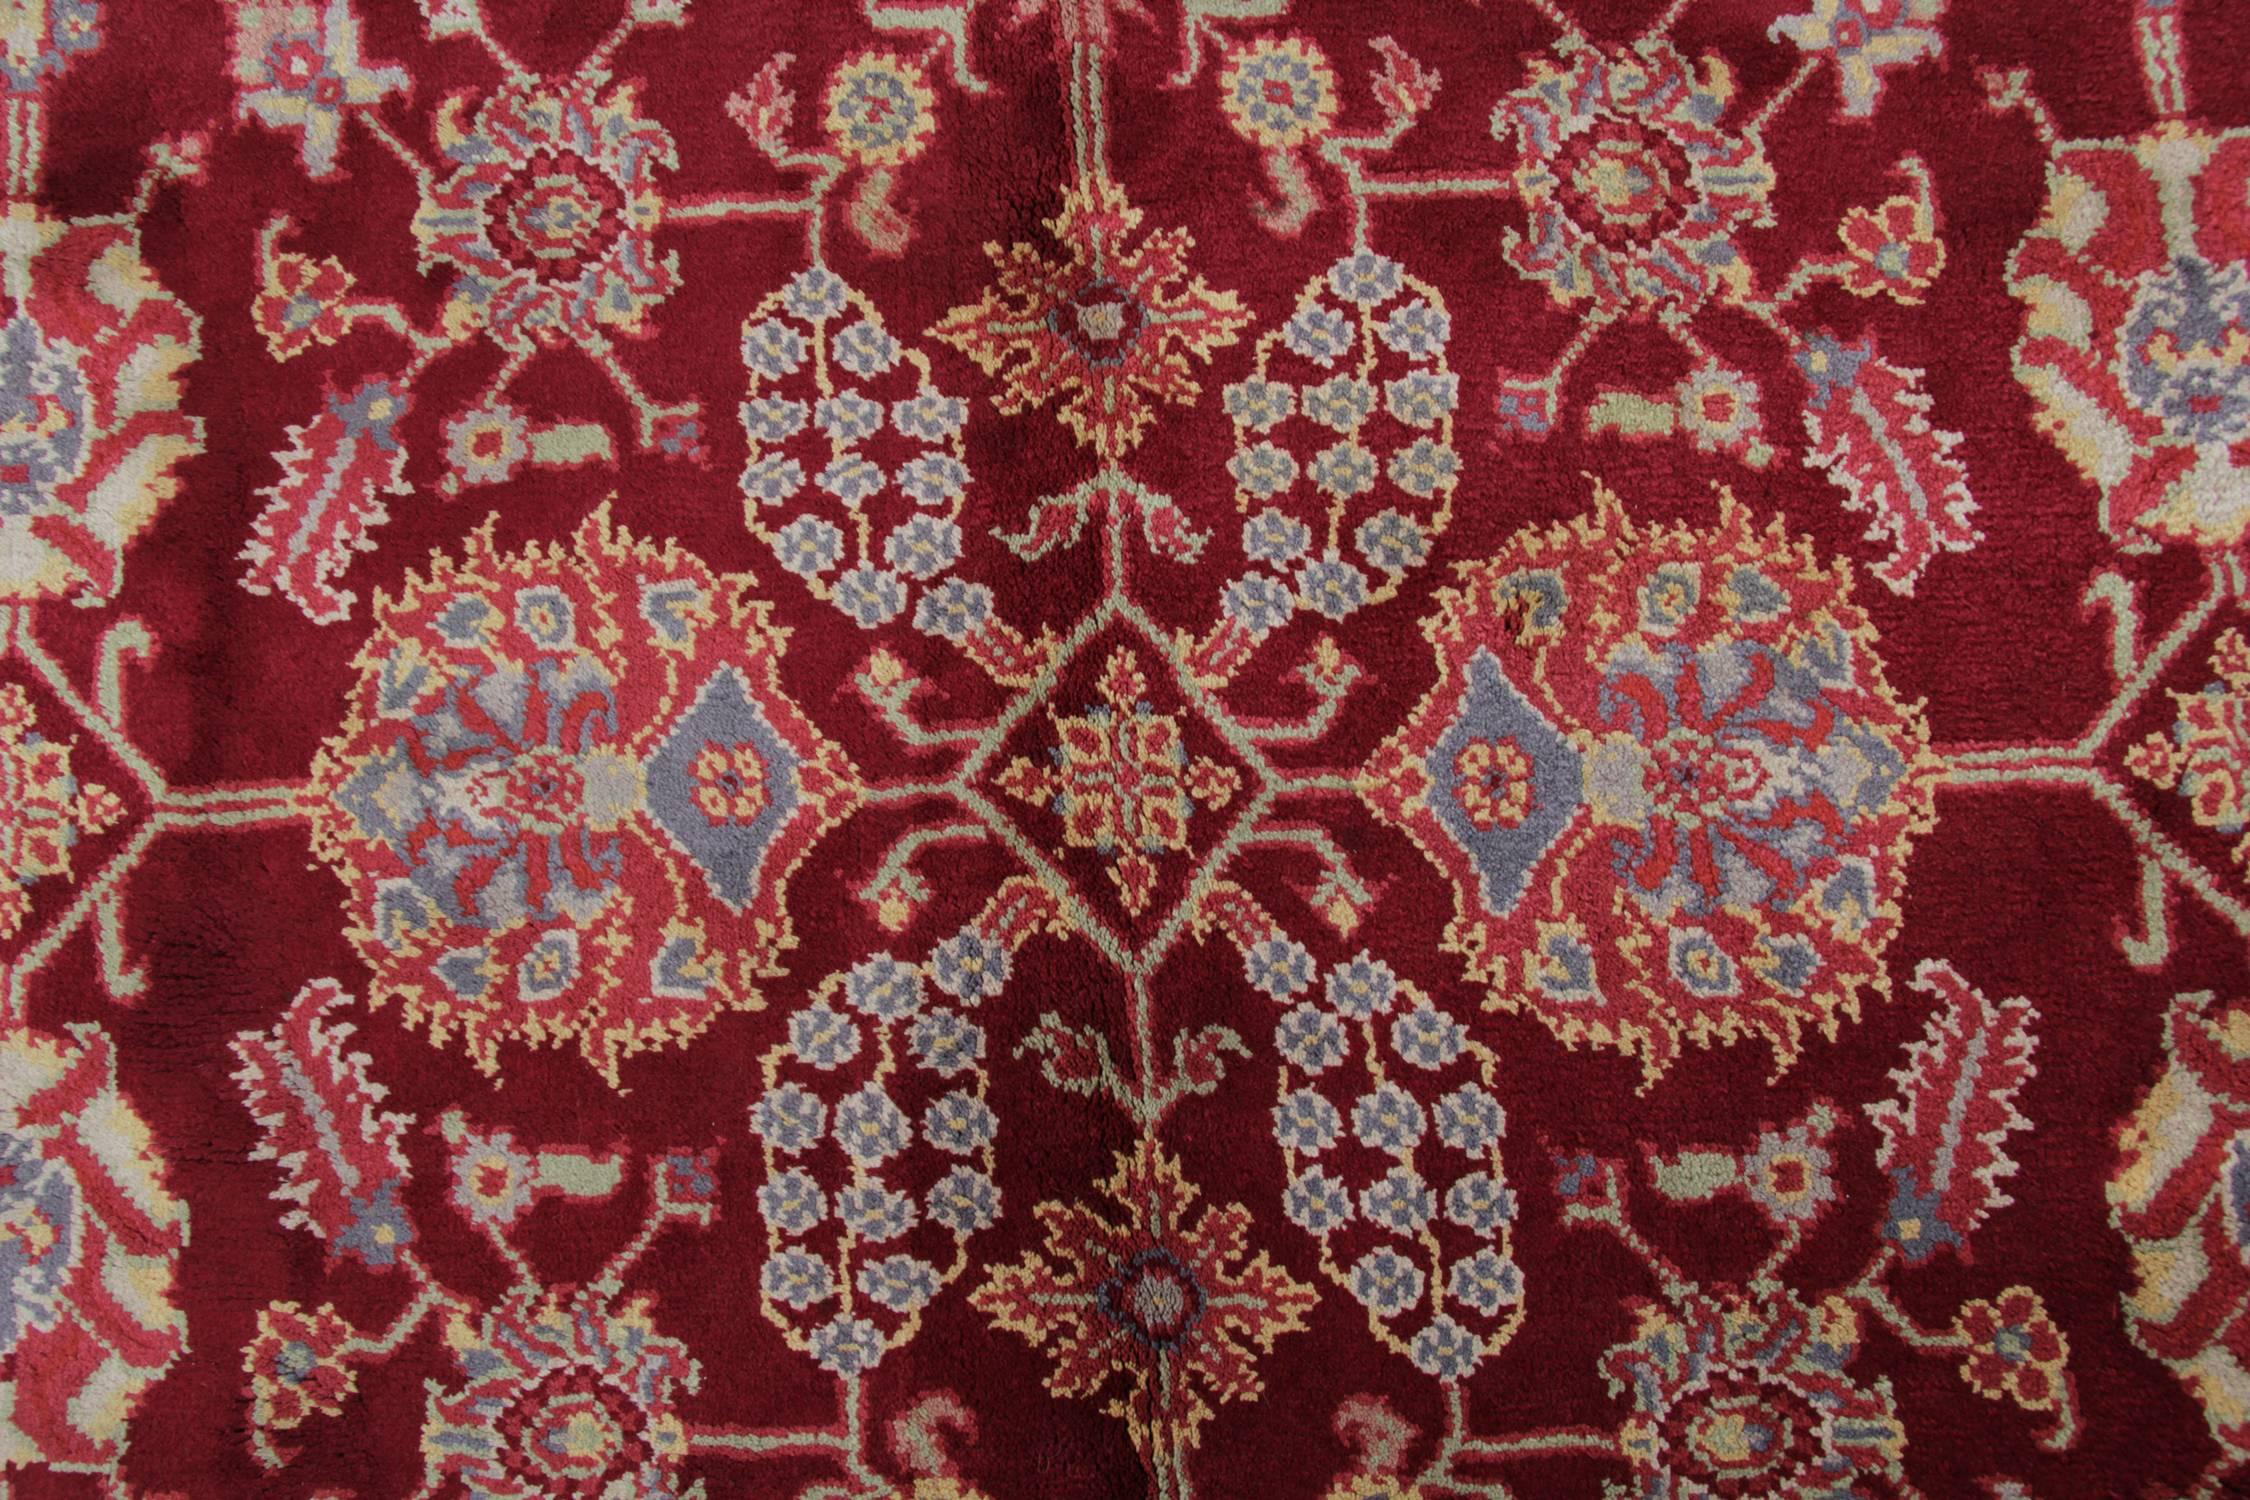 axminster carpet meaning